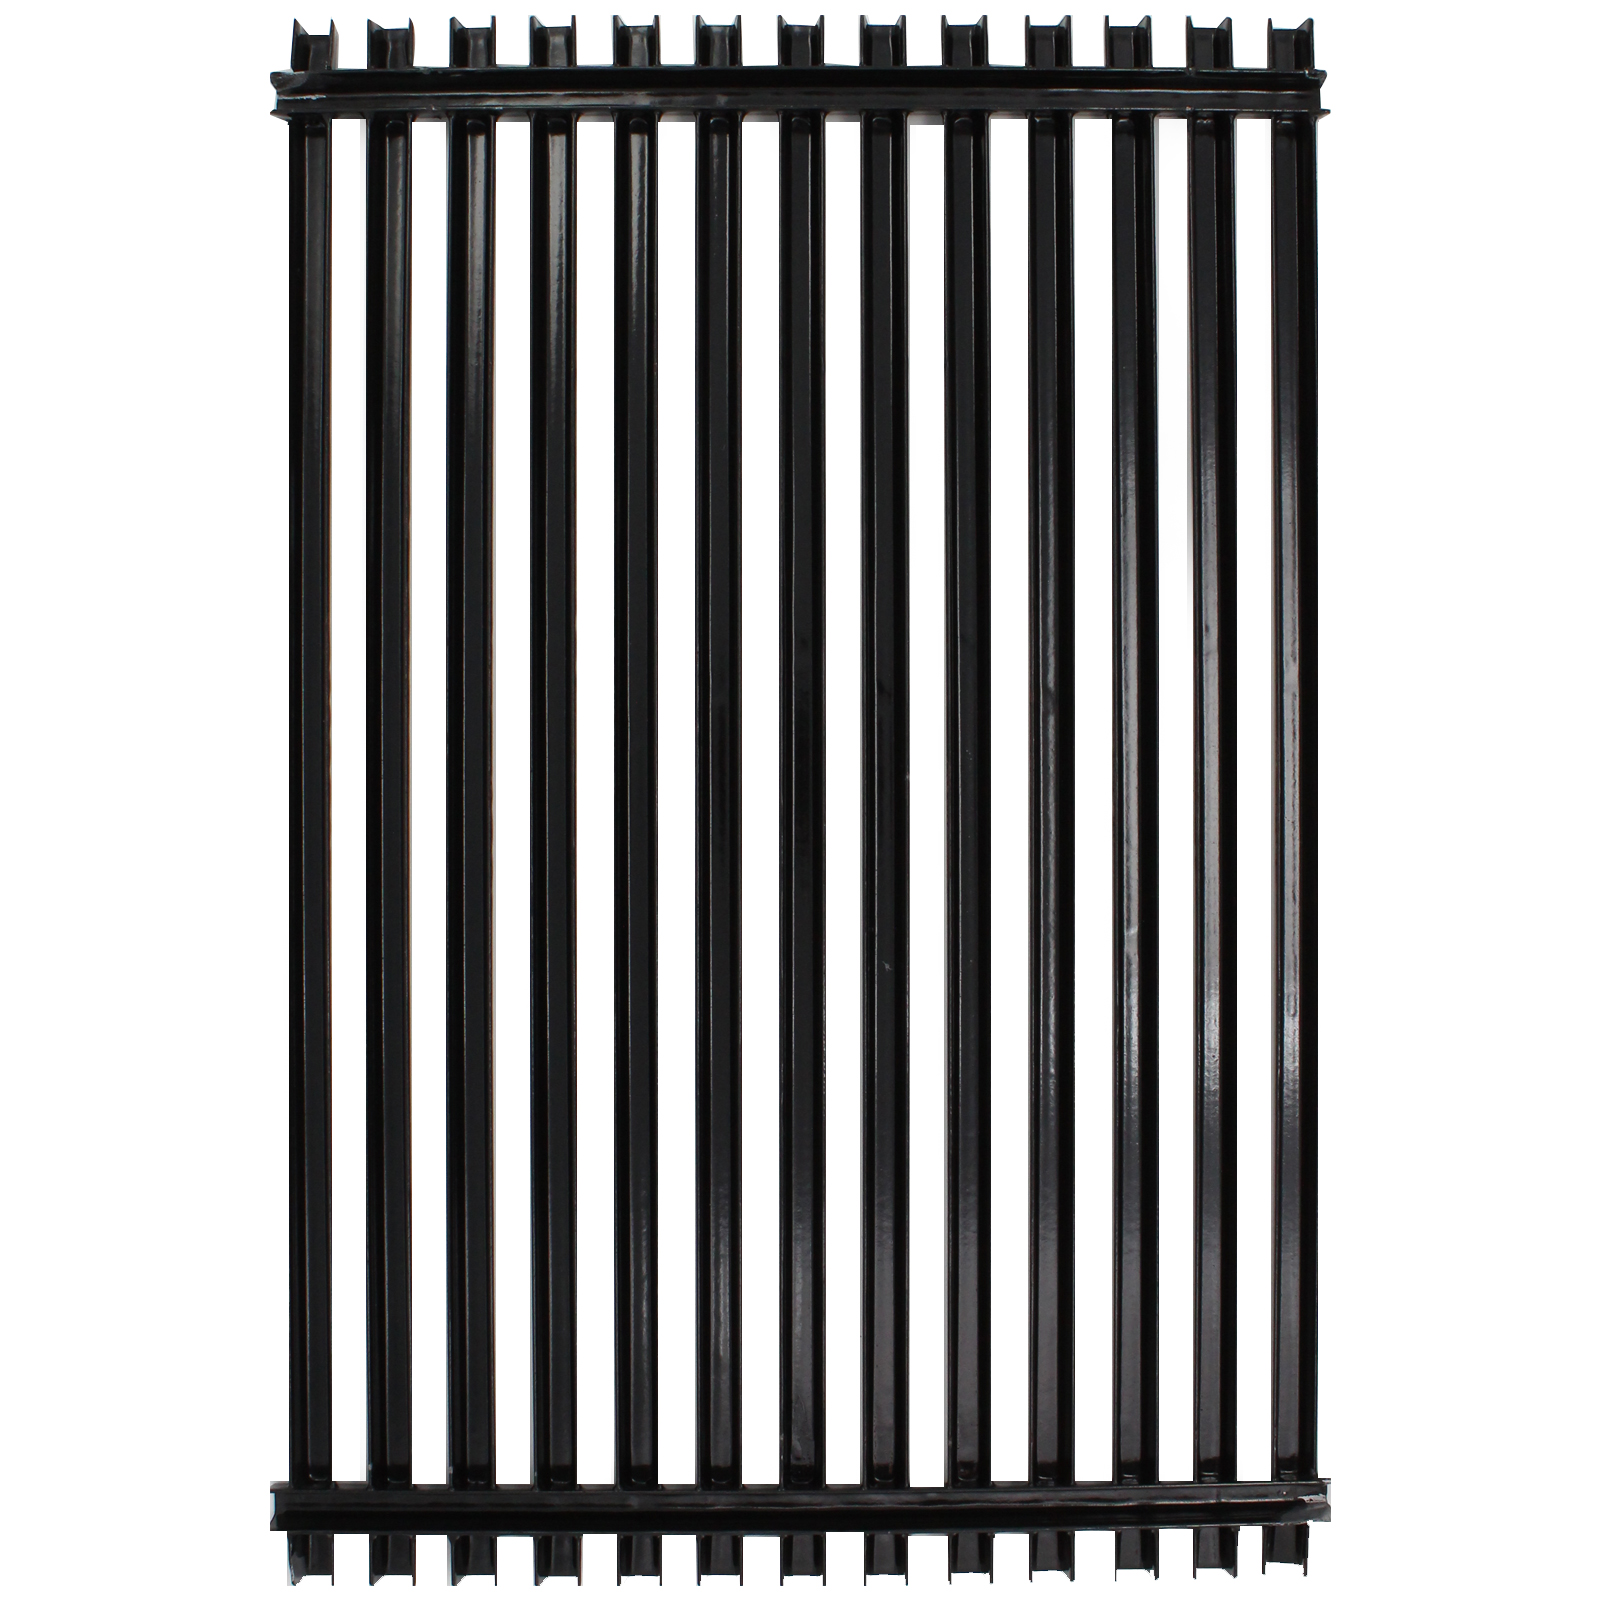 BBQ Grill Cooking Grates Replacement Parts for Weber Spirit E 310, Weber Genesis Silver B, Weber Genesis 1000, Weber Genesis Silver C - Compatible Barbeque Porcelain Coated Steel Grid 17 3/4" - image 2 of 4